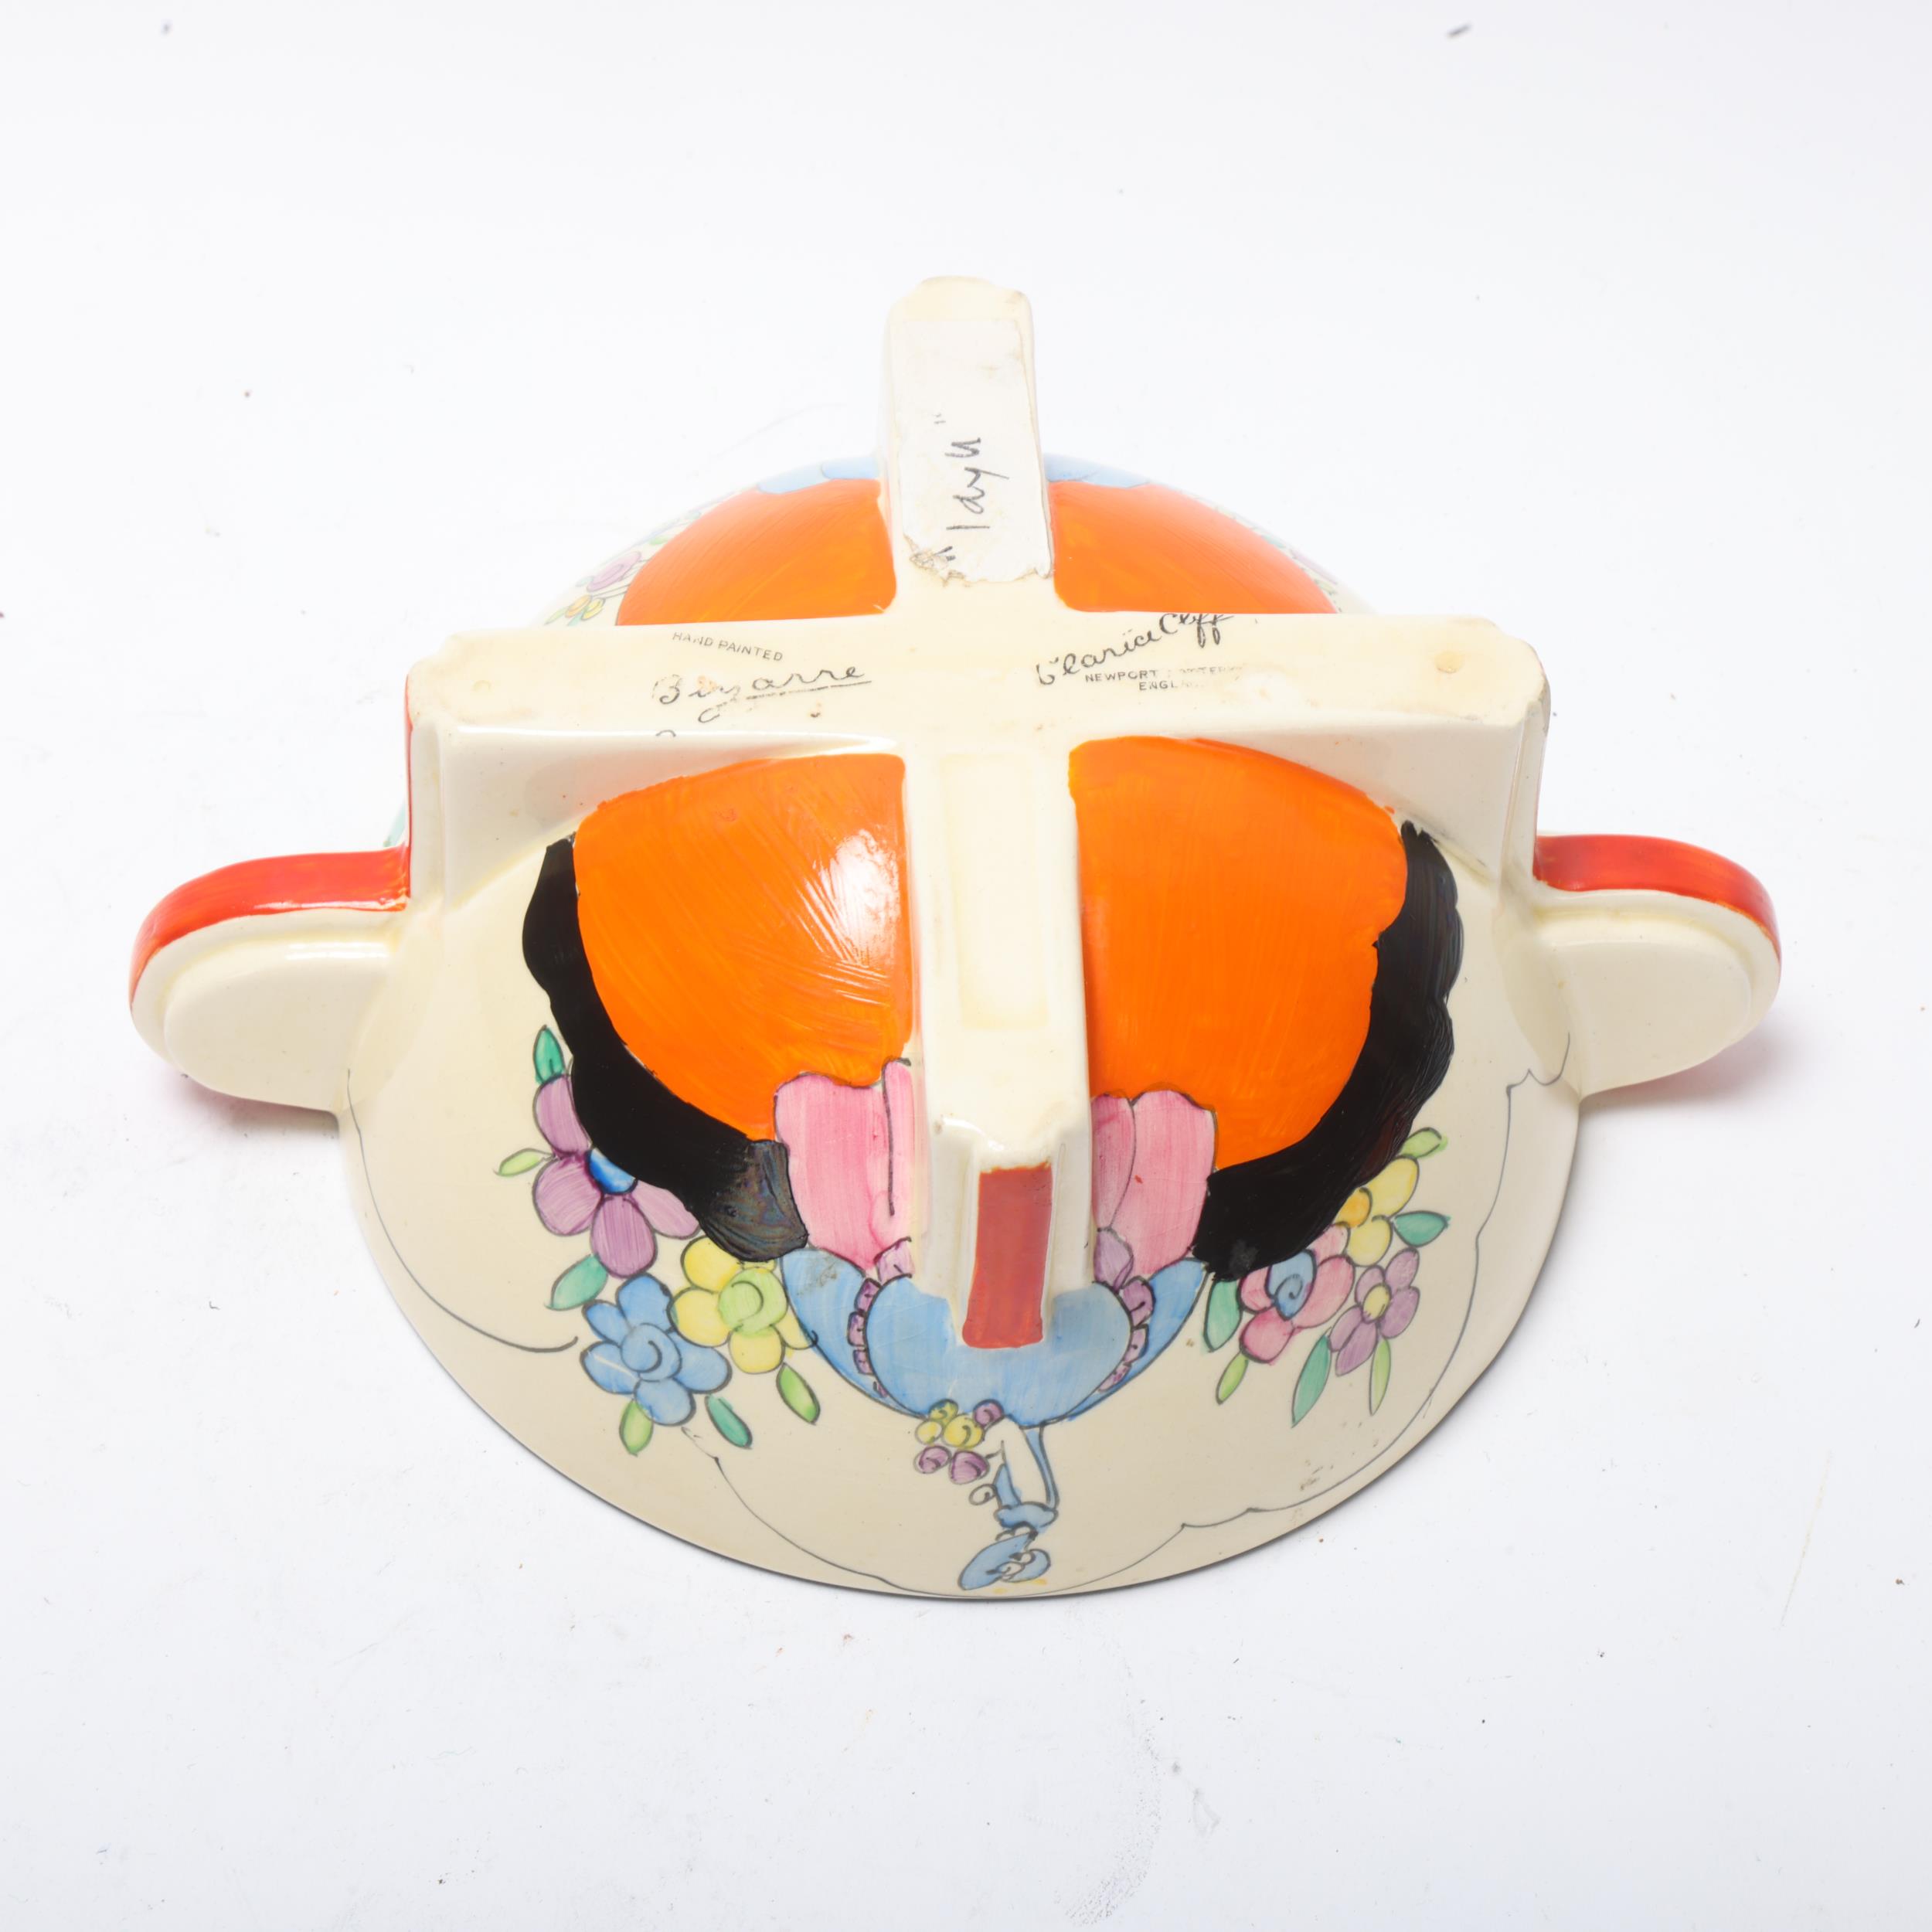 Clarice Cliff Idyll 2-handled bowl, circa 1935, diameter excluding handles 14.5cm Good condition, no - Image 2 of 3